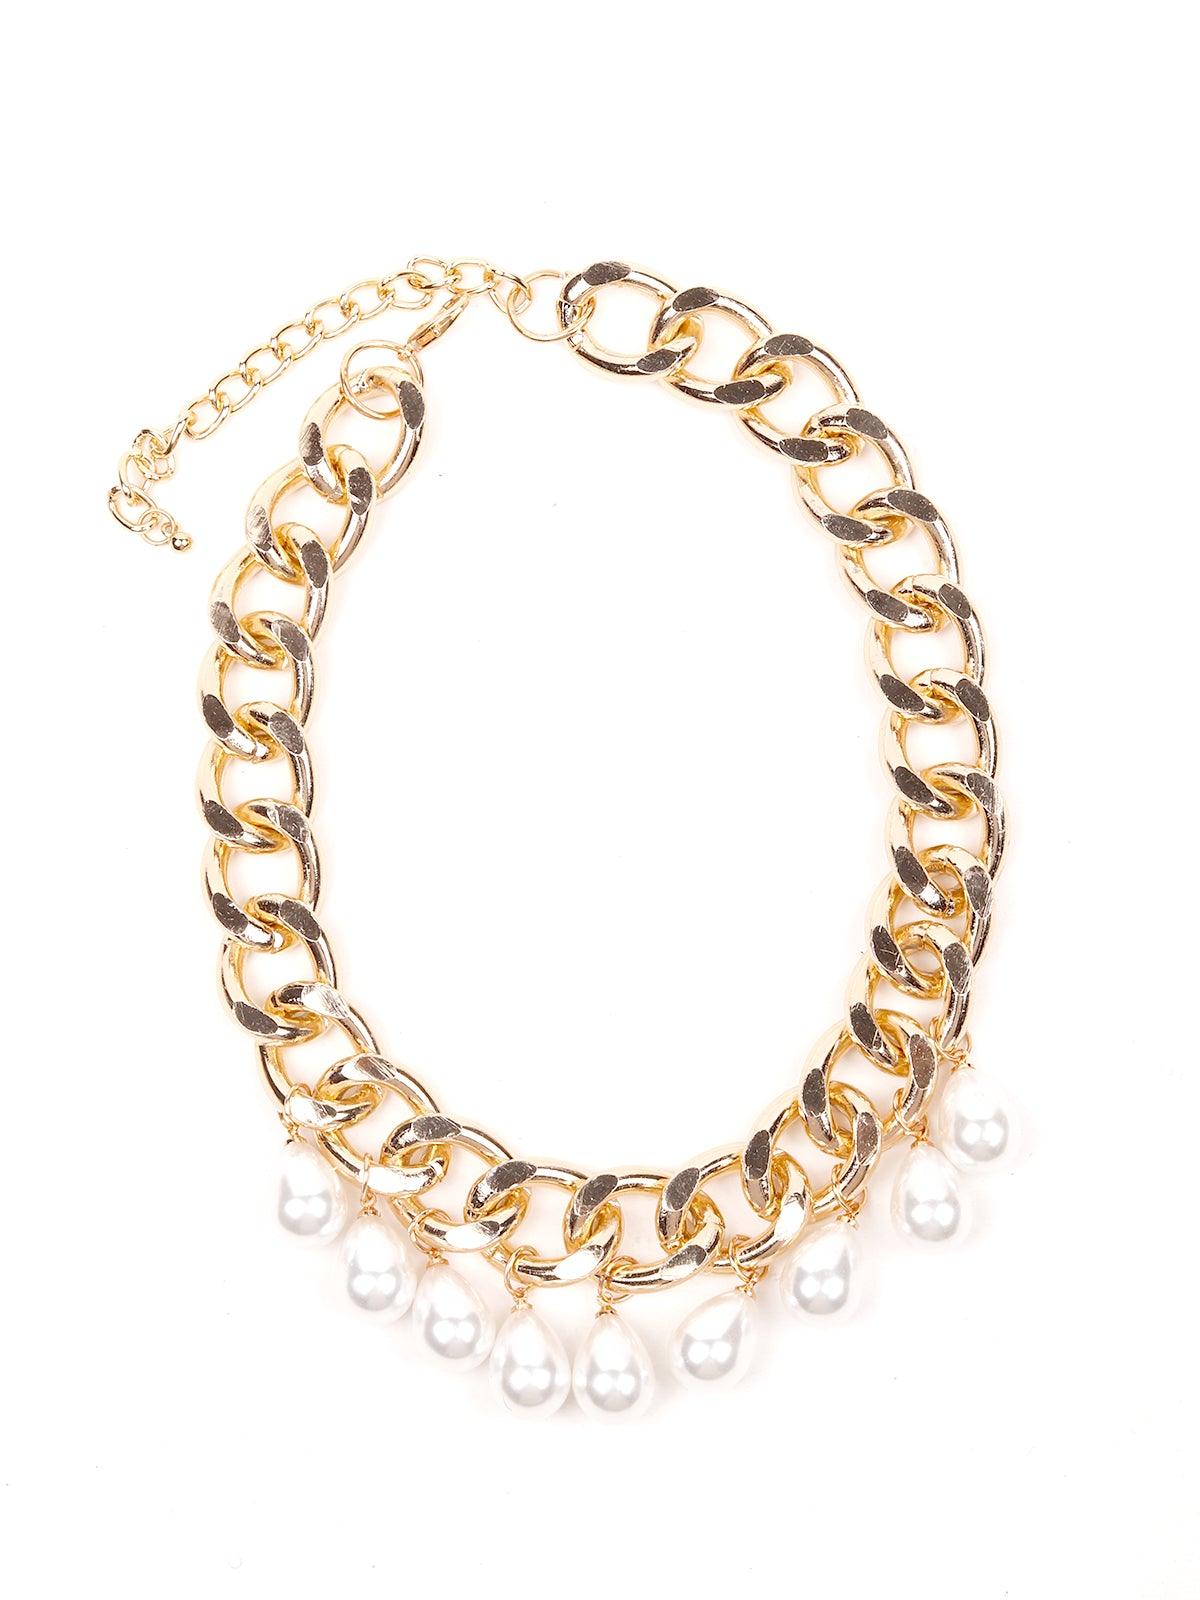 Stunning Interlinked Gold Chain With White Stones Embedded. - Odette